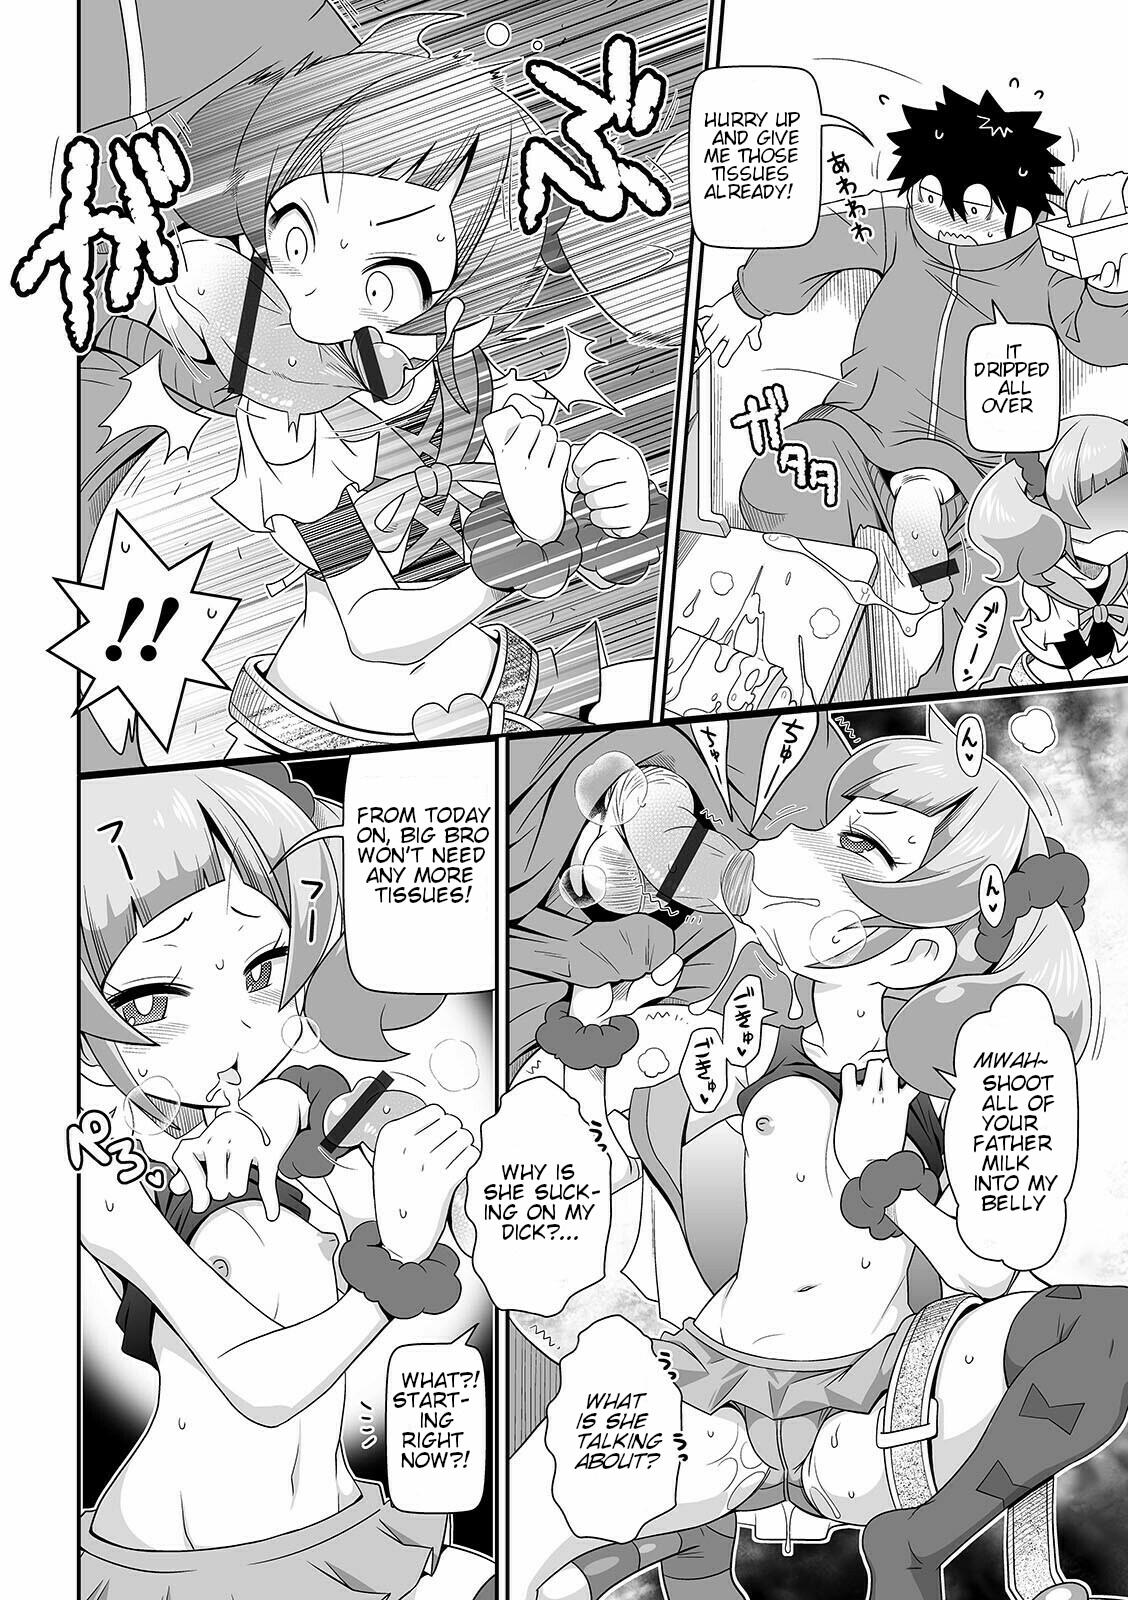 Naked Imouto Tissue | Lil Sis' Tissues - Original Ass Fetish - Page 6